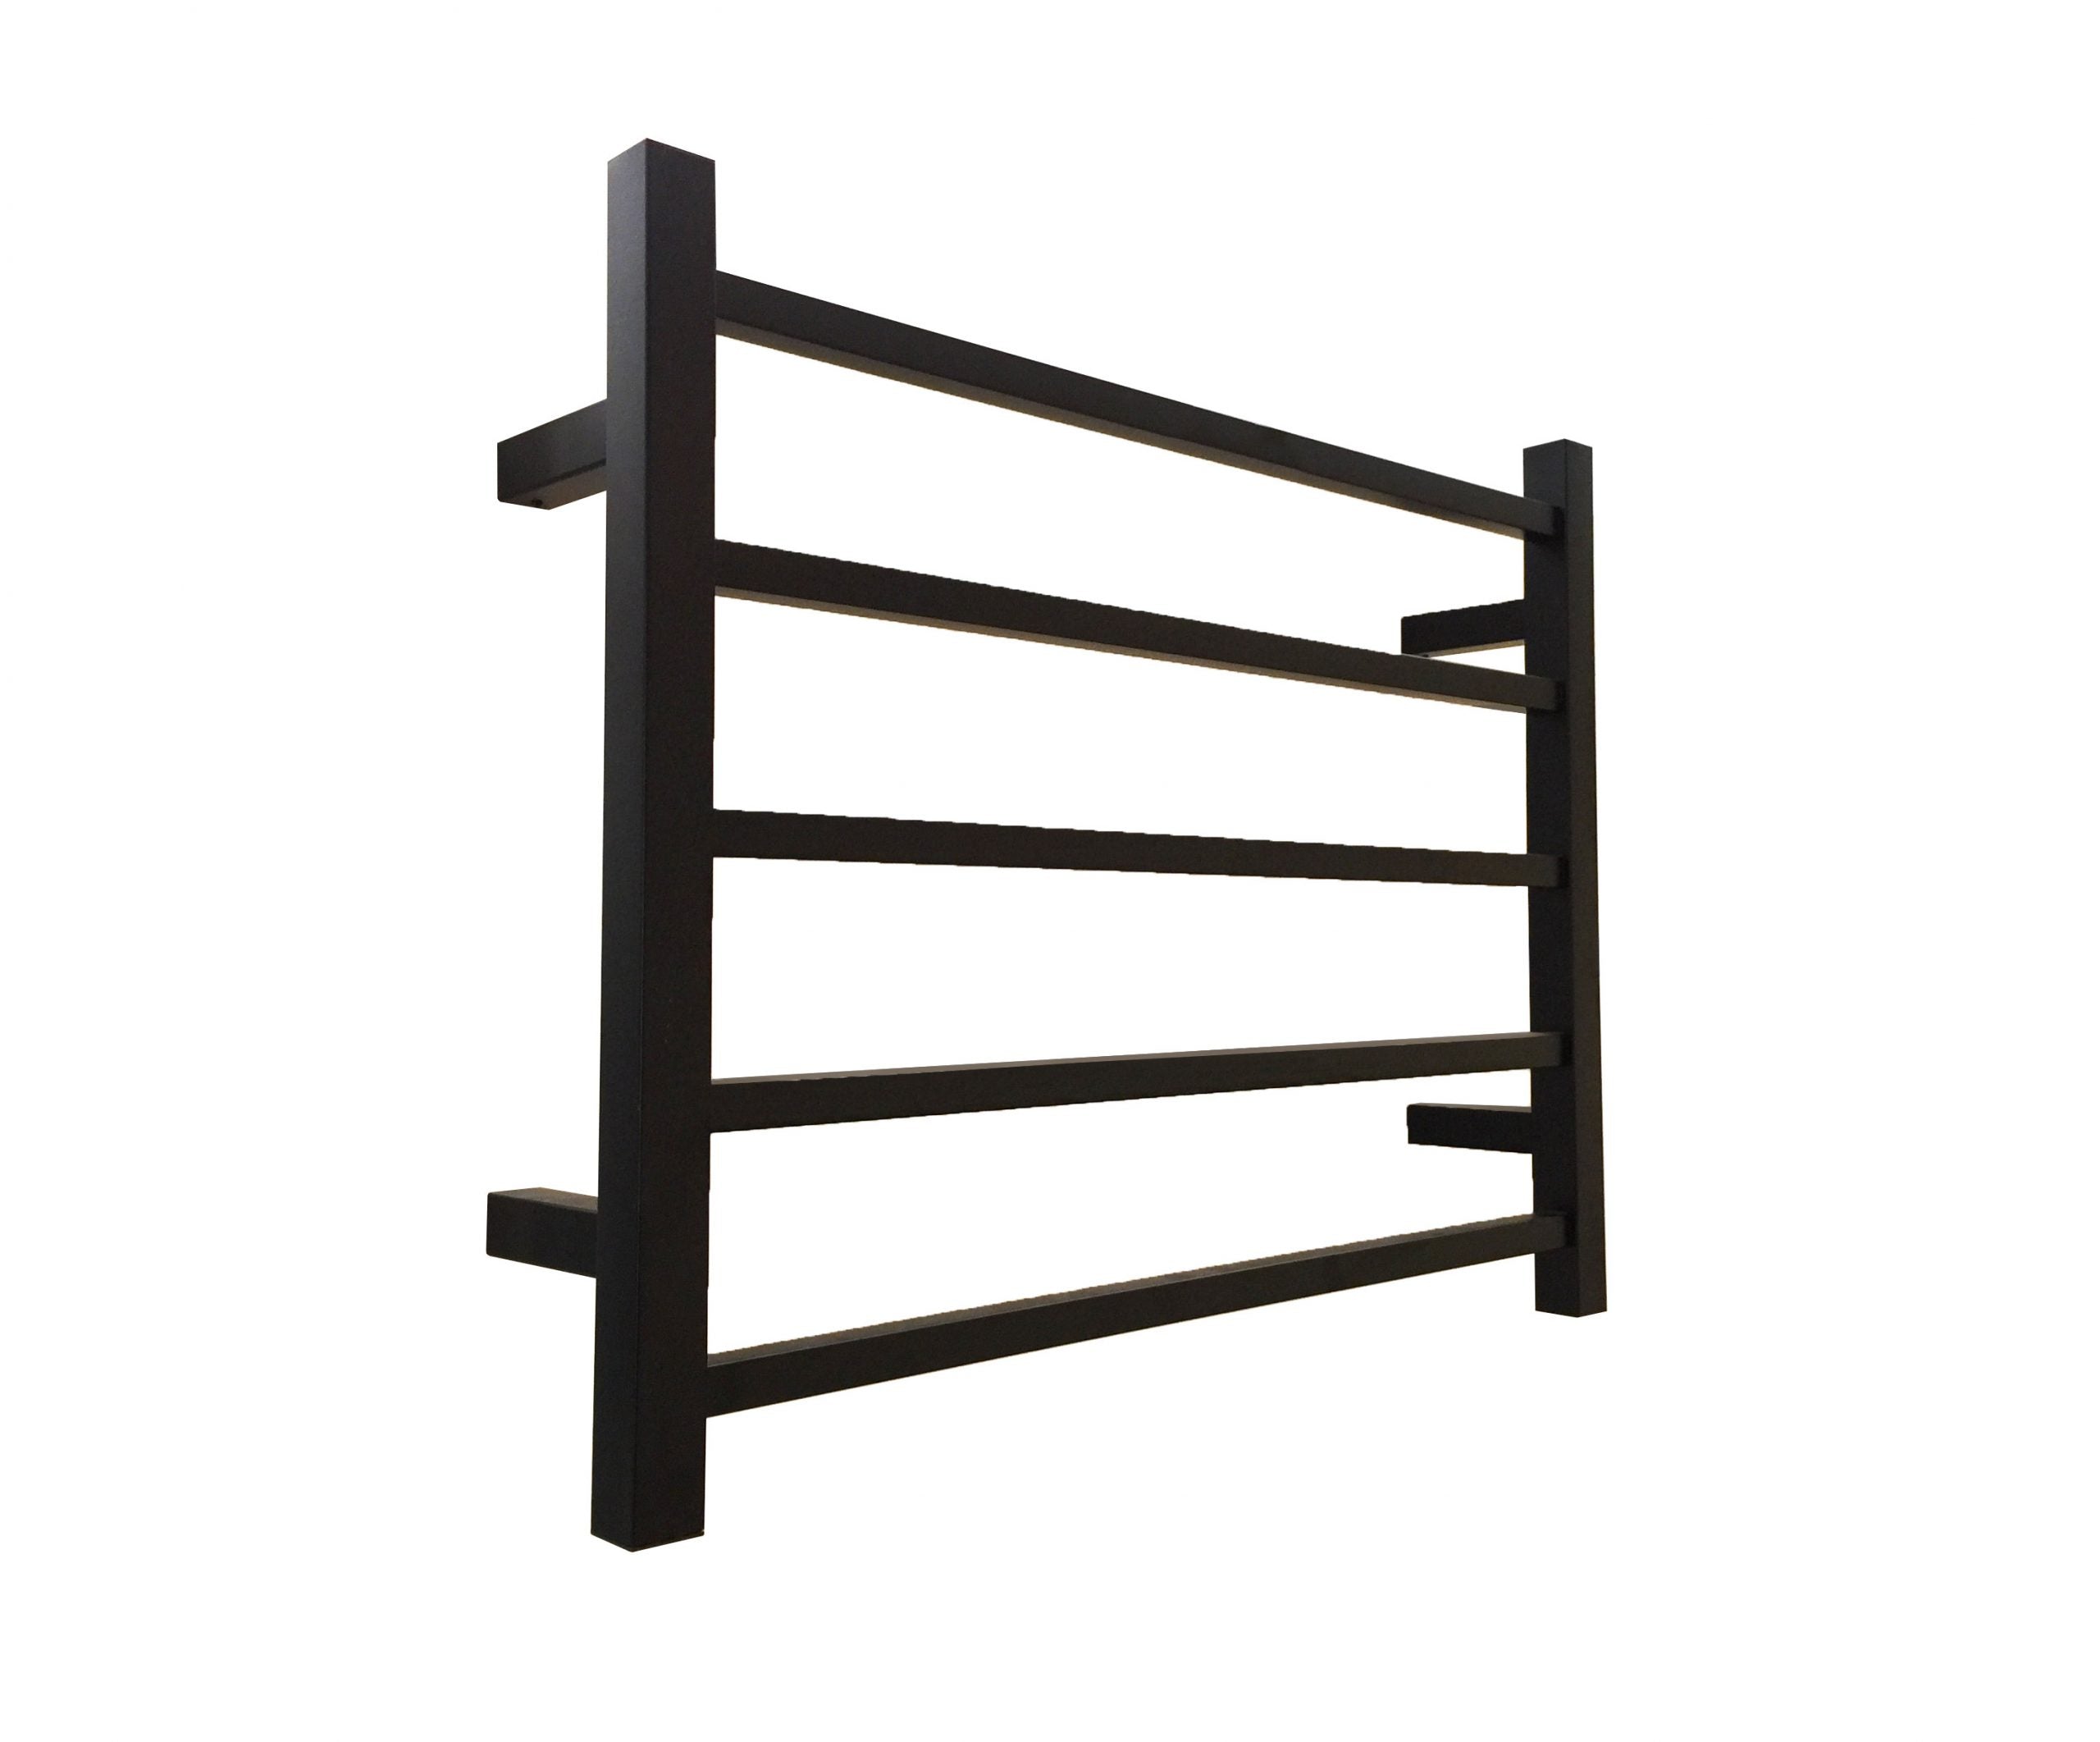 510*650mm Matt Black Square Heated Towel Rail. Wiring Concealed or Exposed